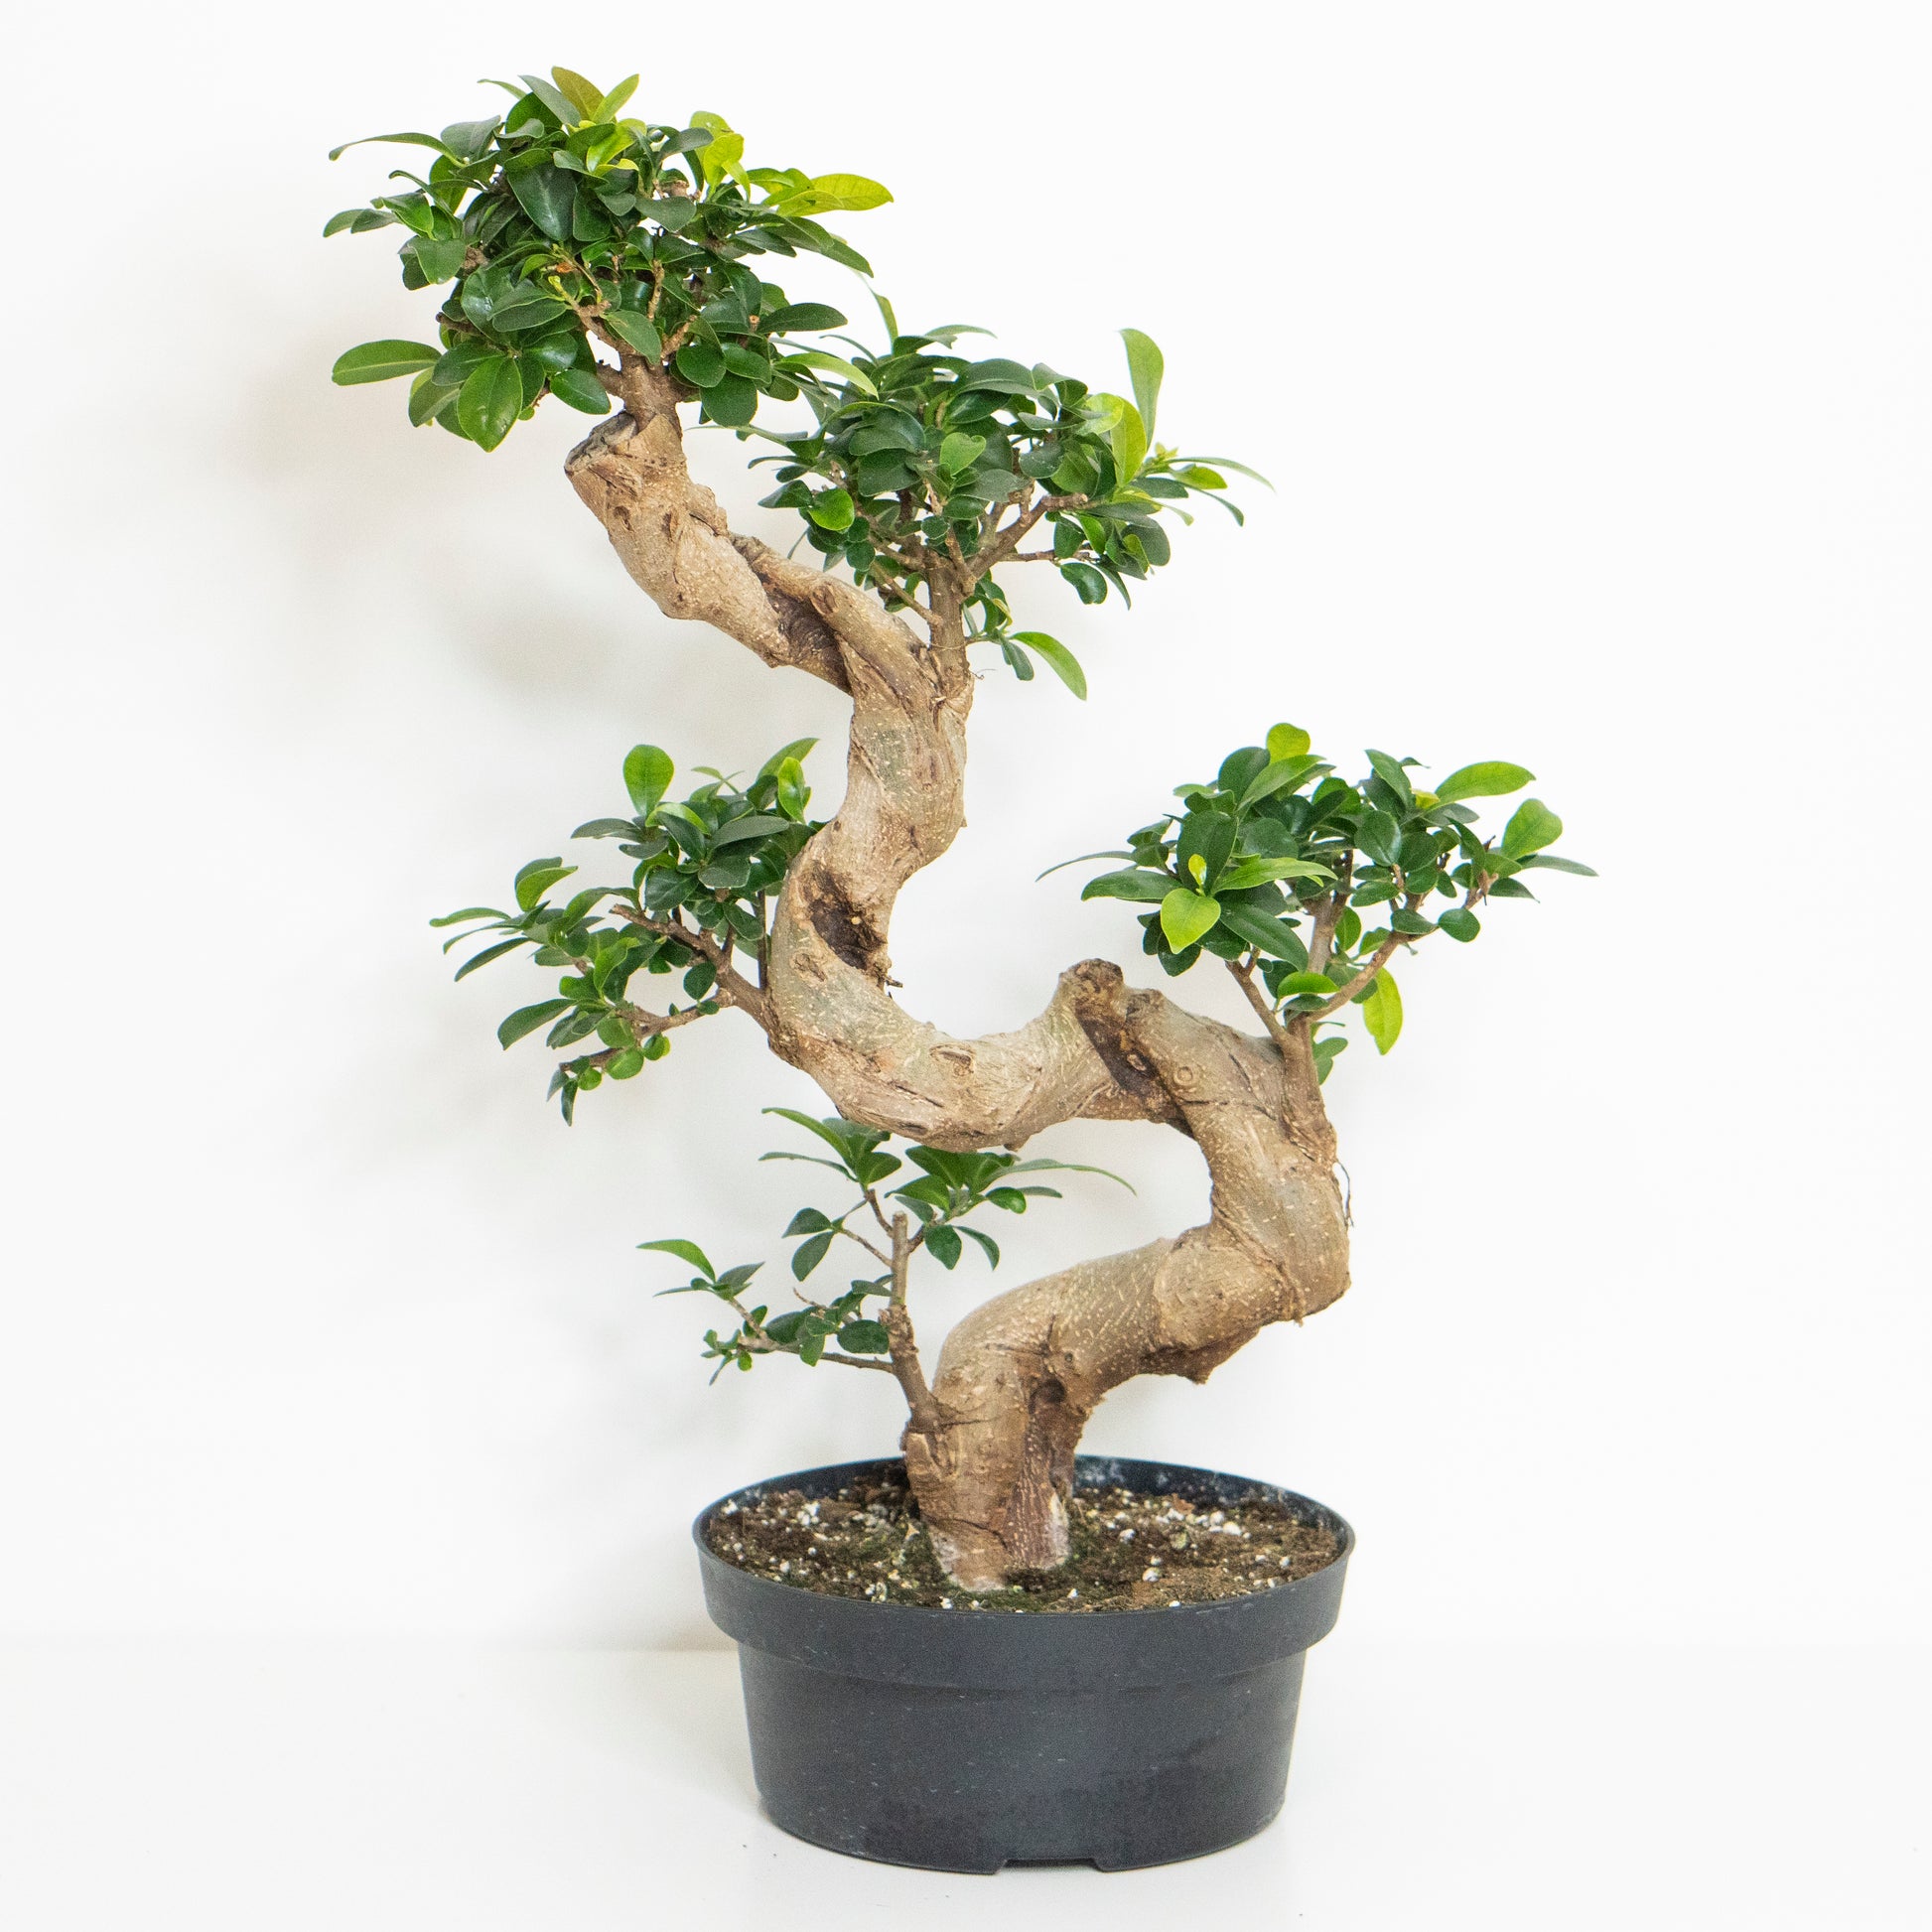 Potted Rare Houseplant Bonsai Ficus Retusa S-Shape 8” - Buy repotted rare indoor plant Bonsai Ficus Retusa with twisted trunk for delivery at Planteia